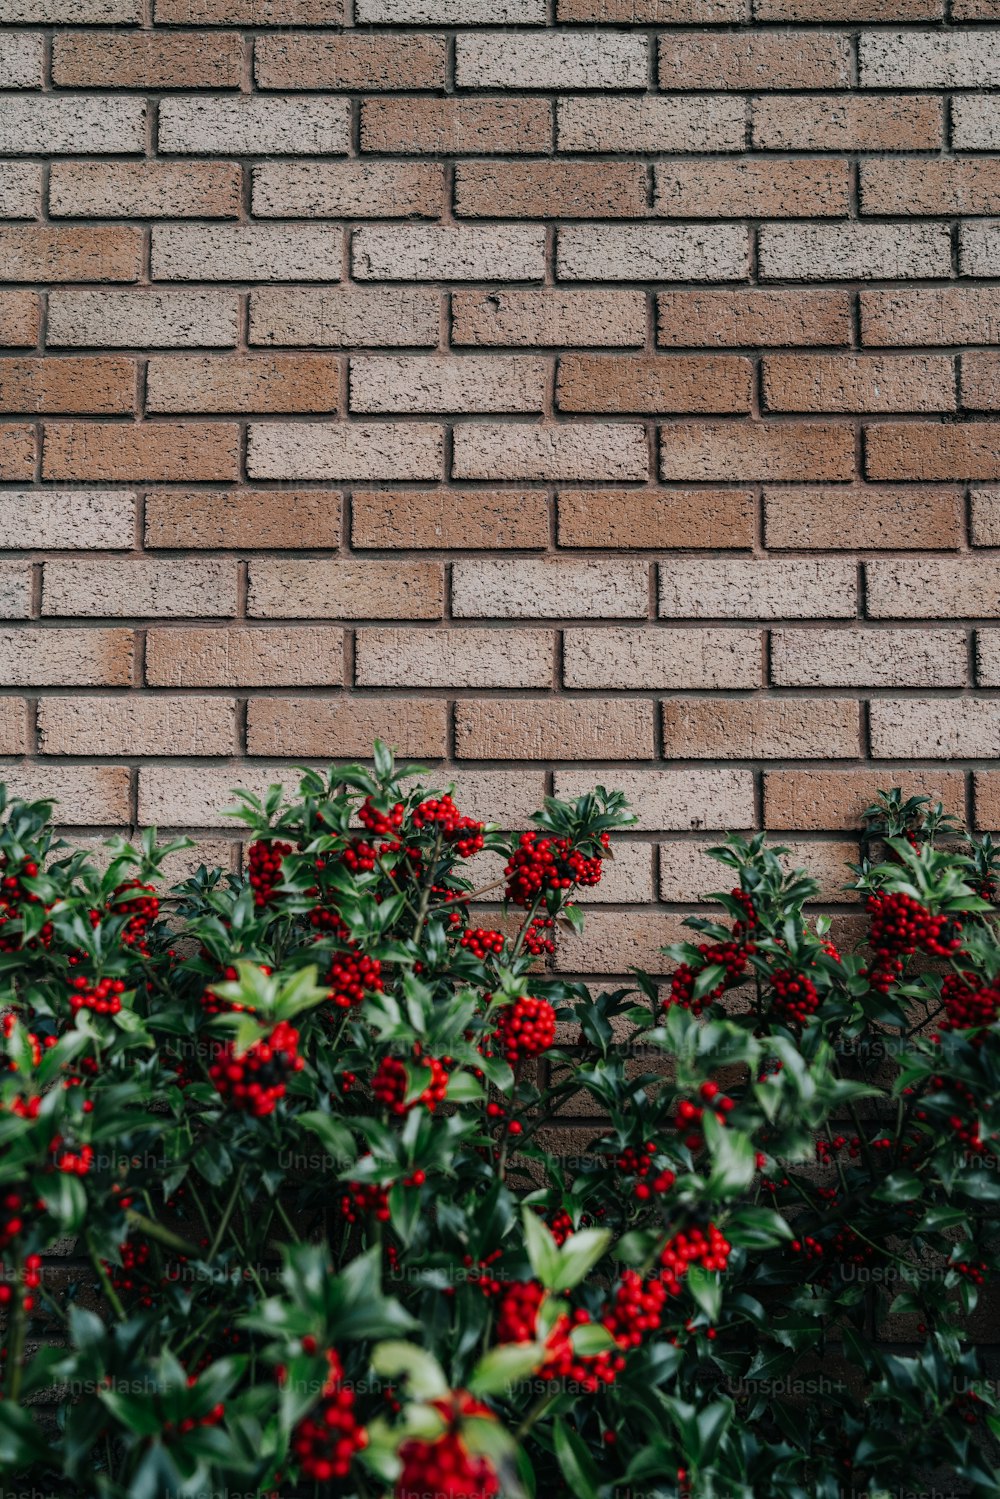 a brick wall with red berries growing on it